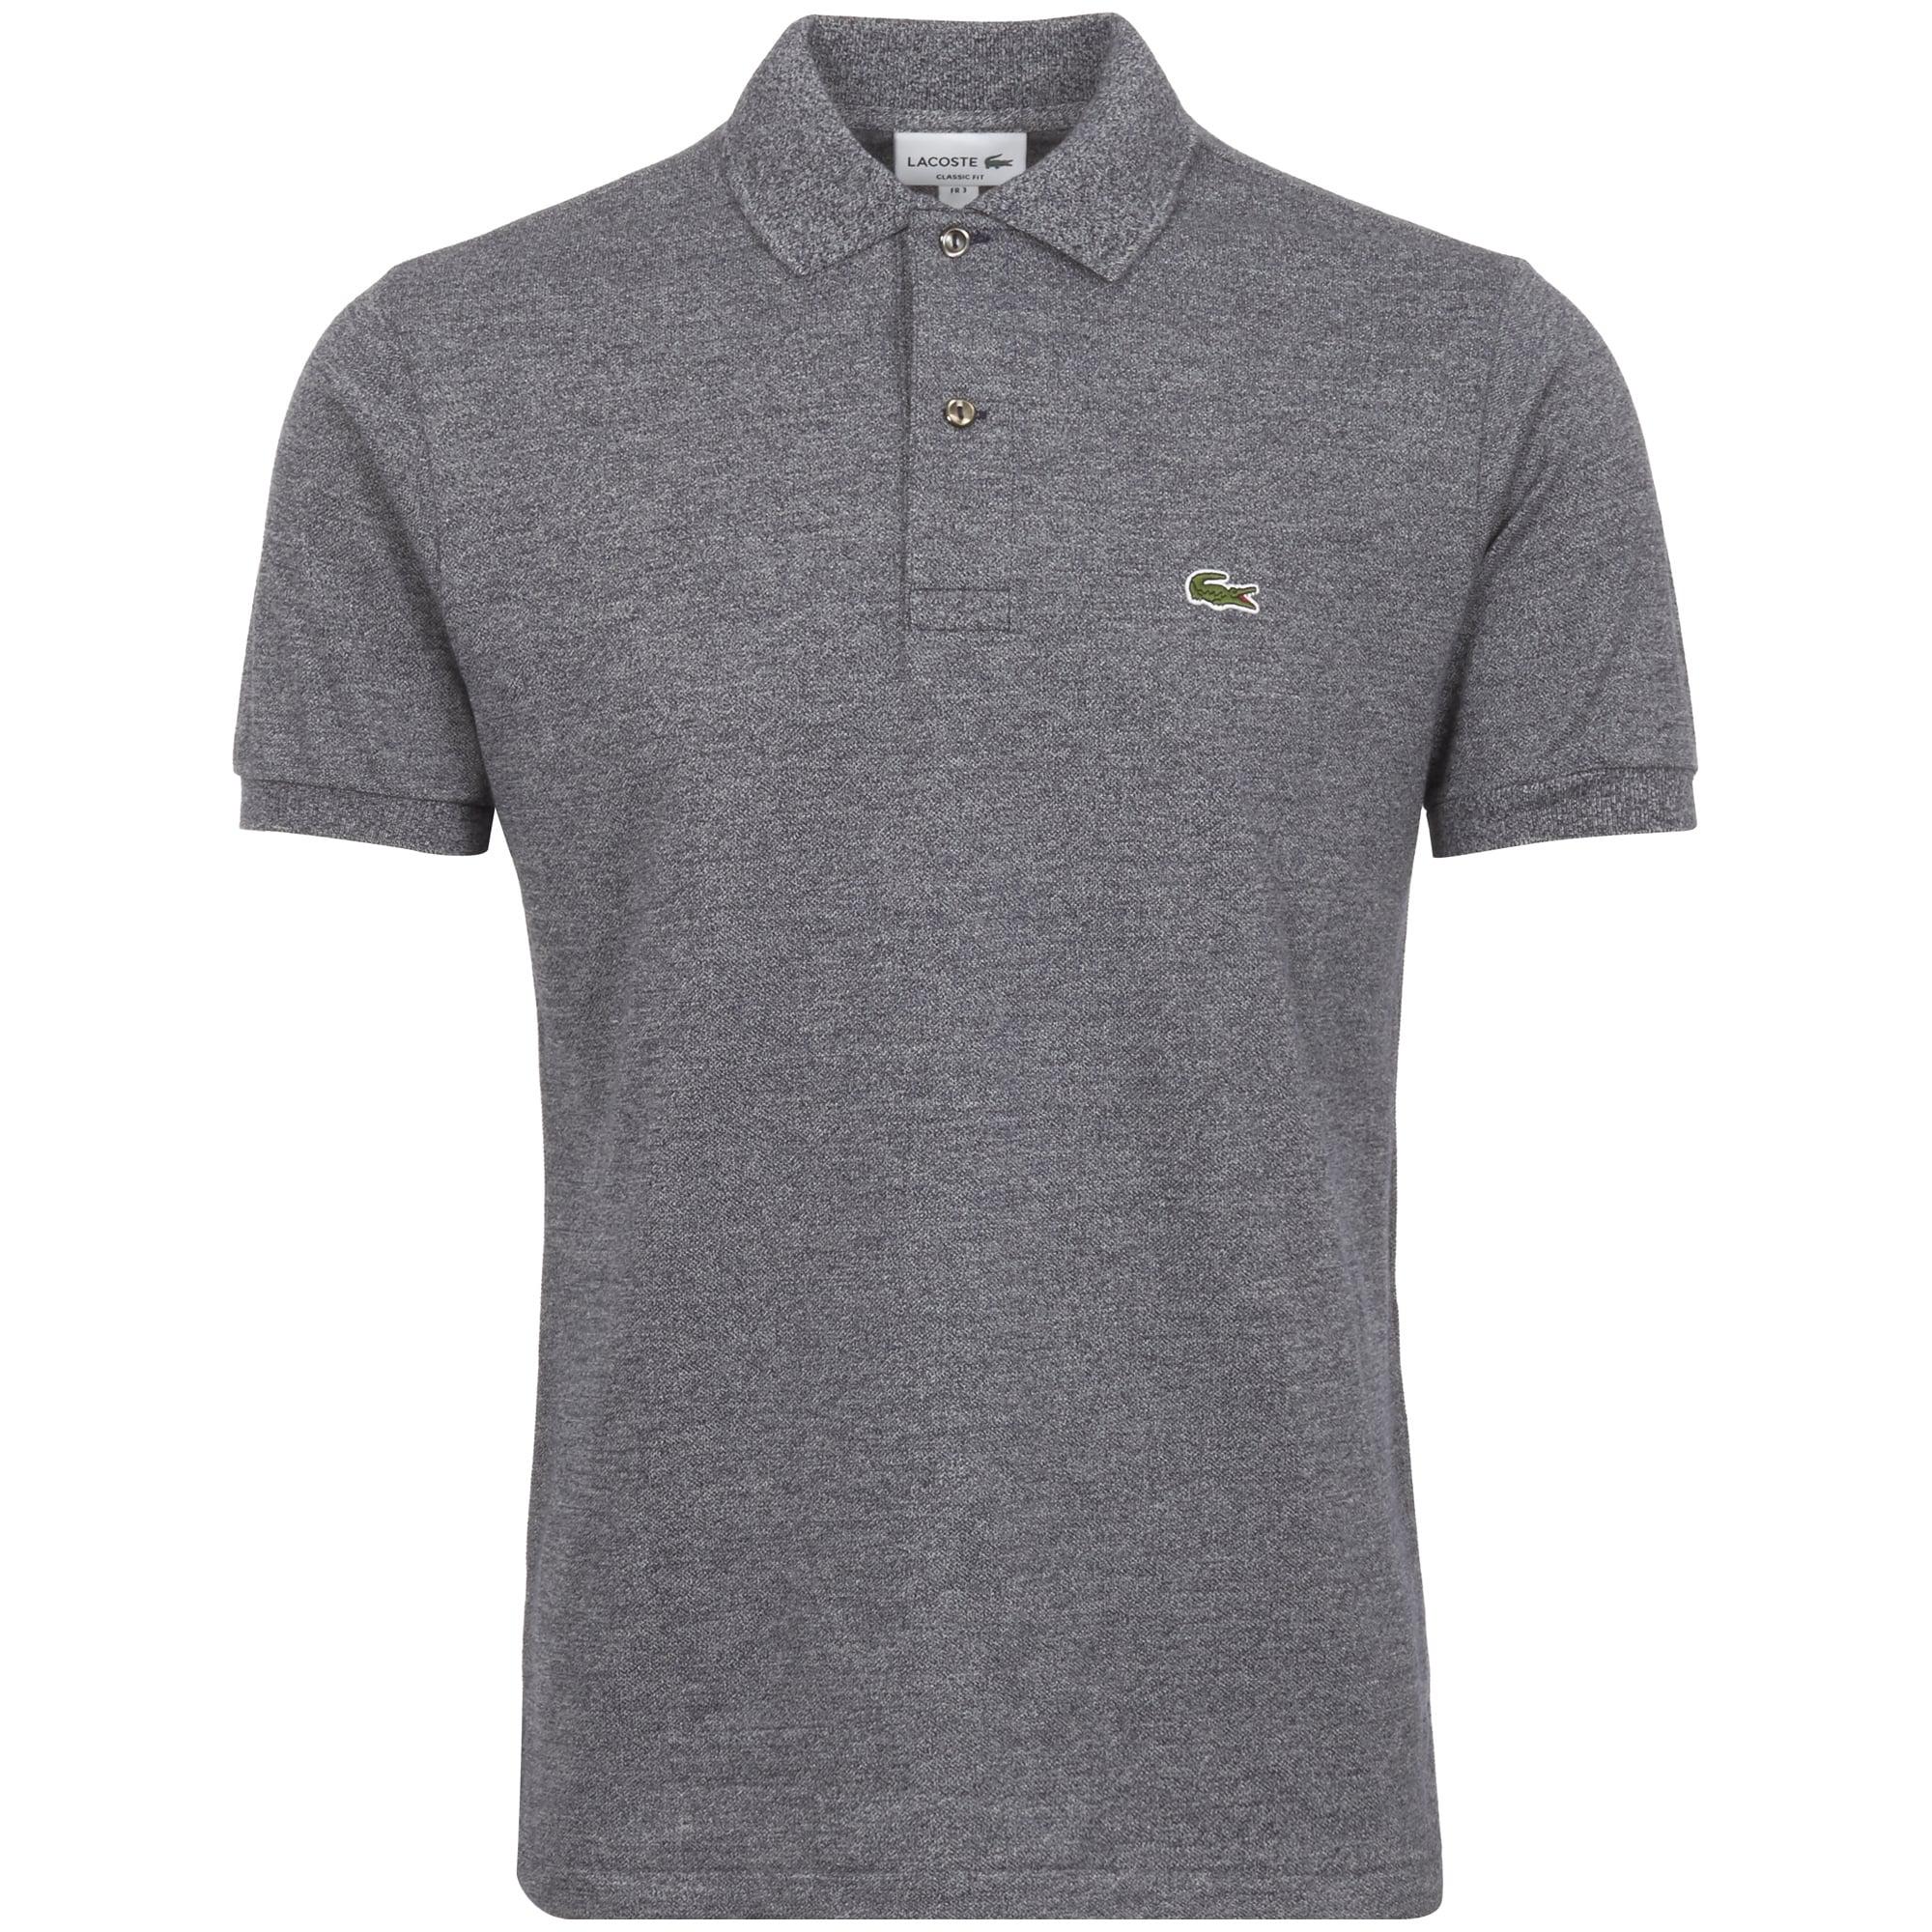 Lyst - Lacoste Grey L.12.12 Polo Shirt in Gray for Men - Save 29%